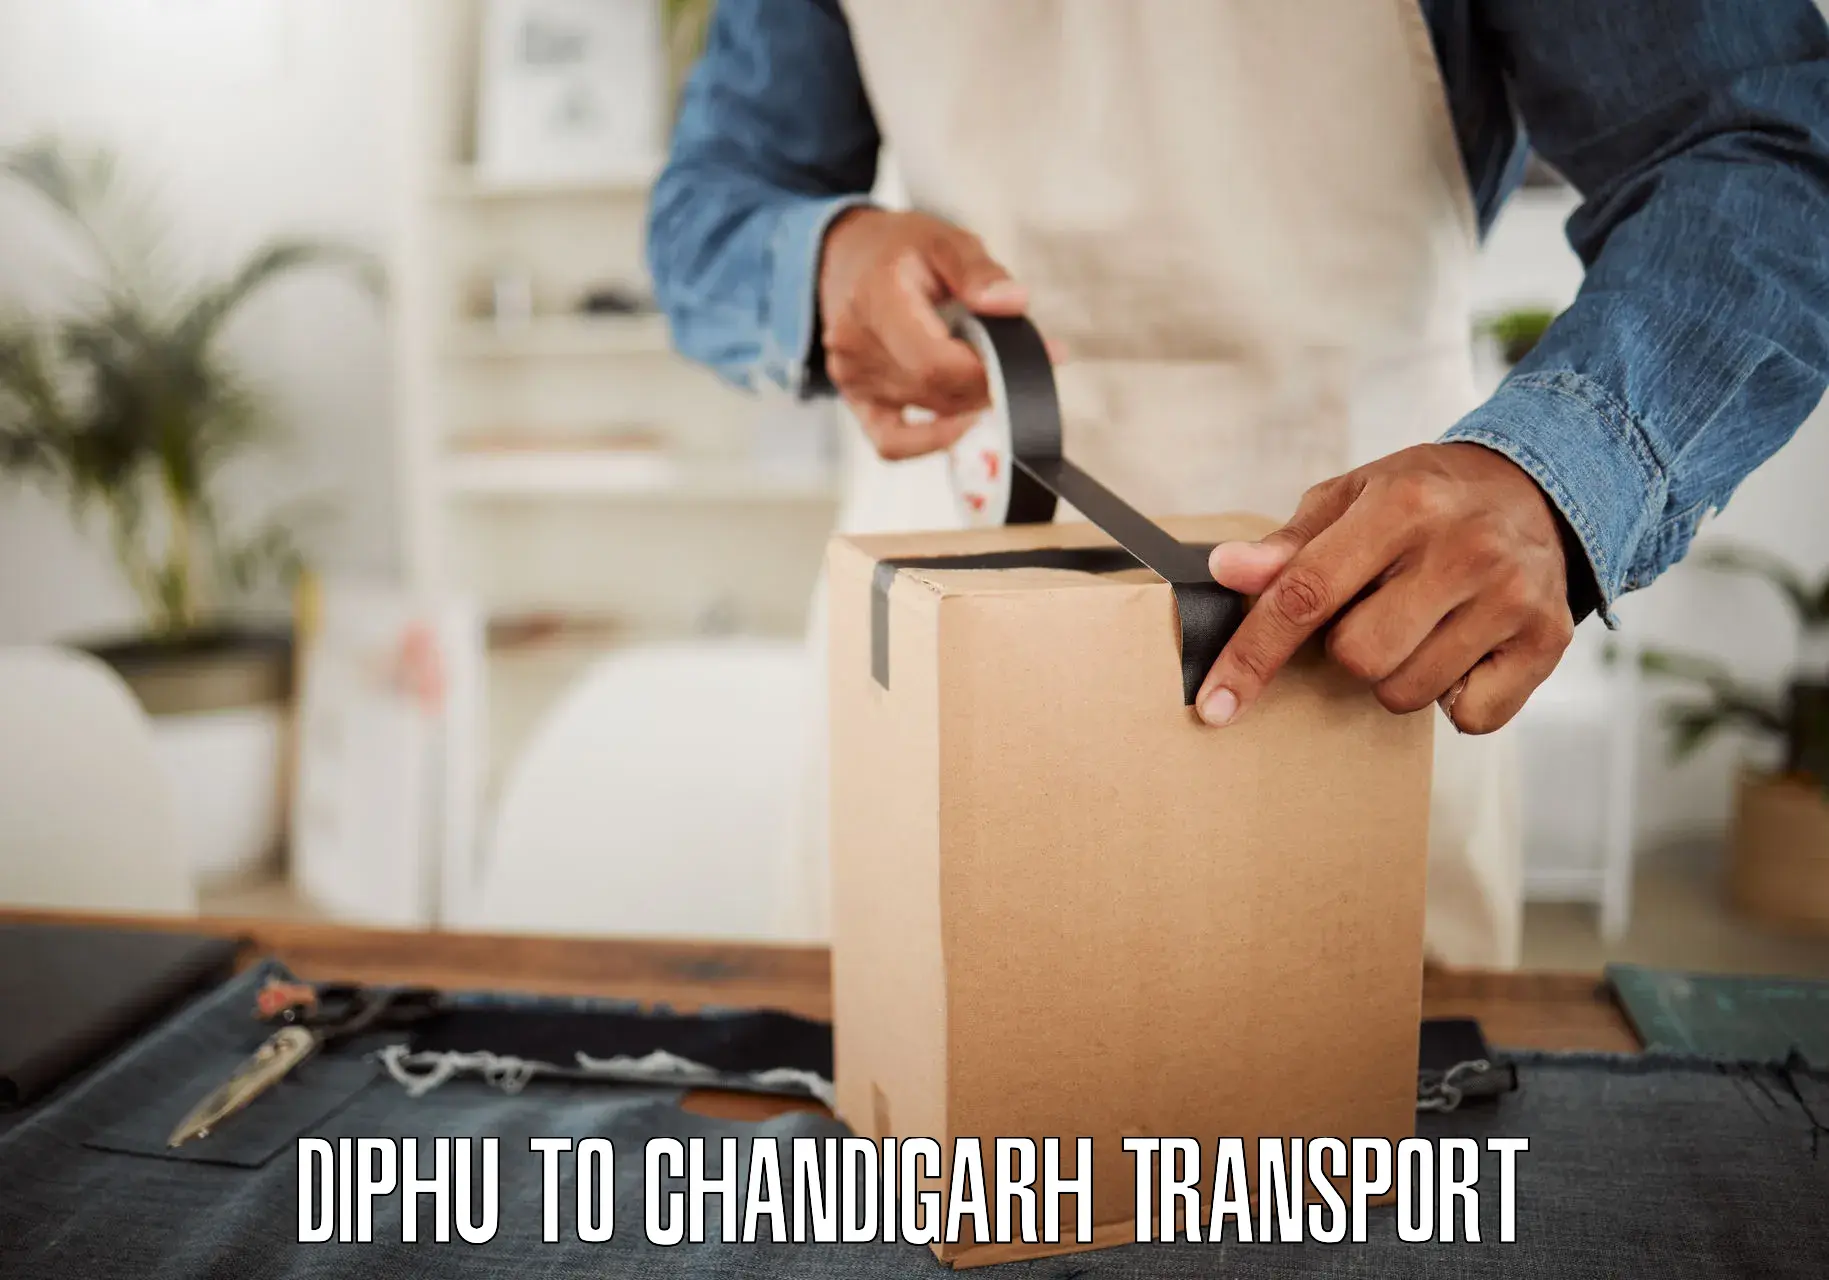 Cargo train transport services Diphu to Chandigarh